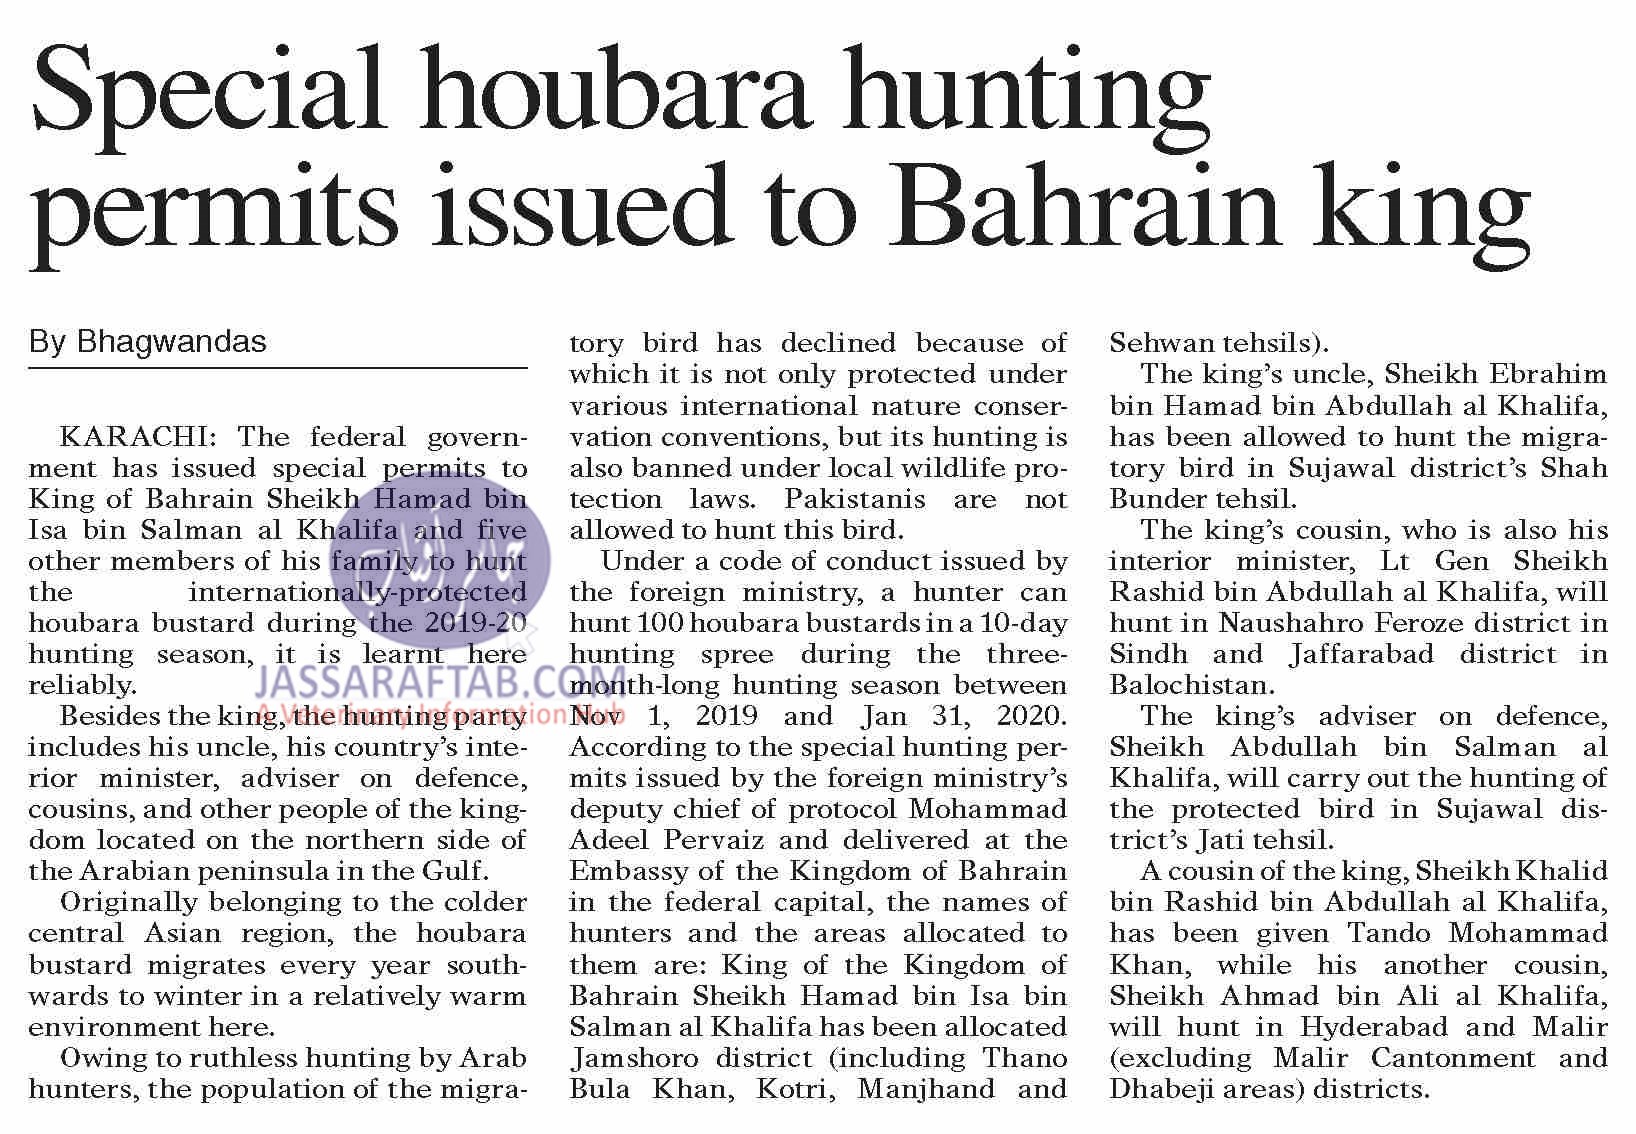 Special houbara bustard hunting permits issued to Bahrain king